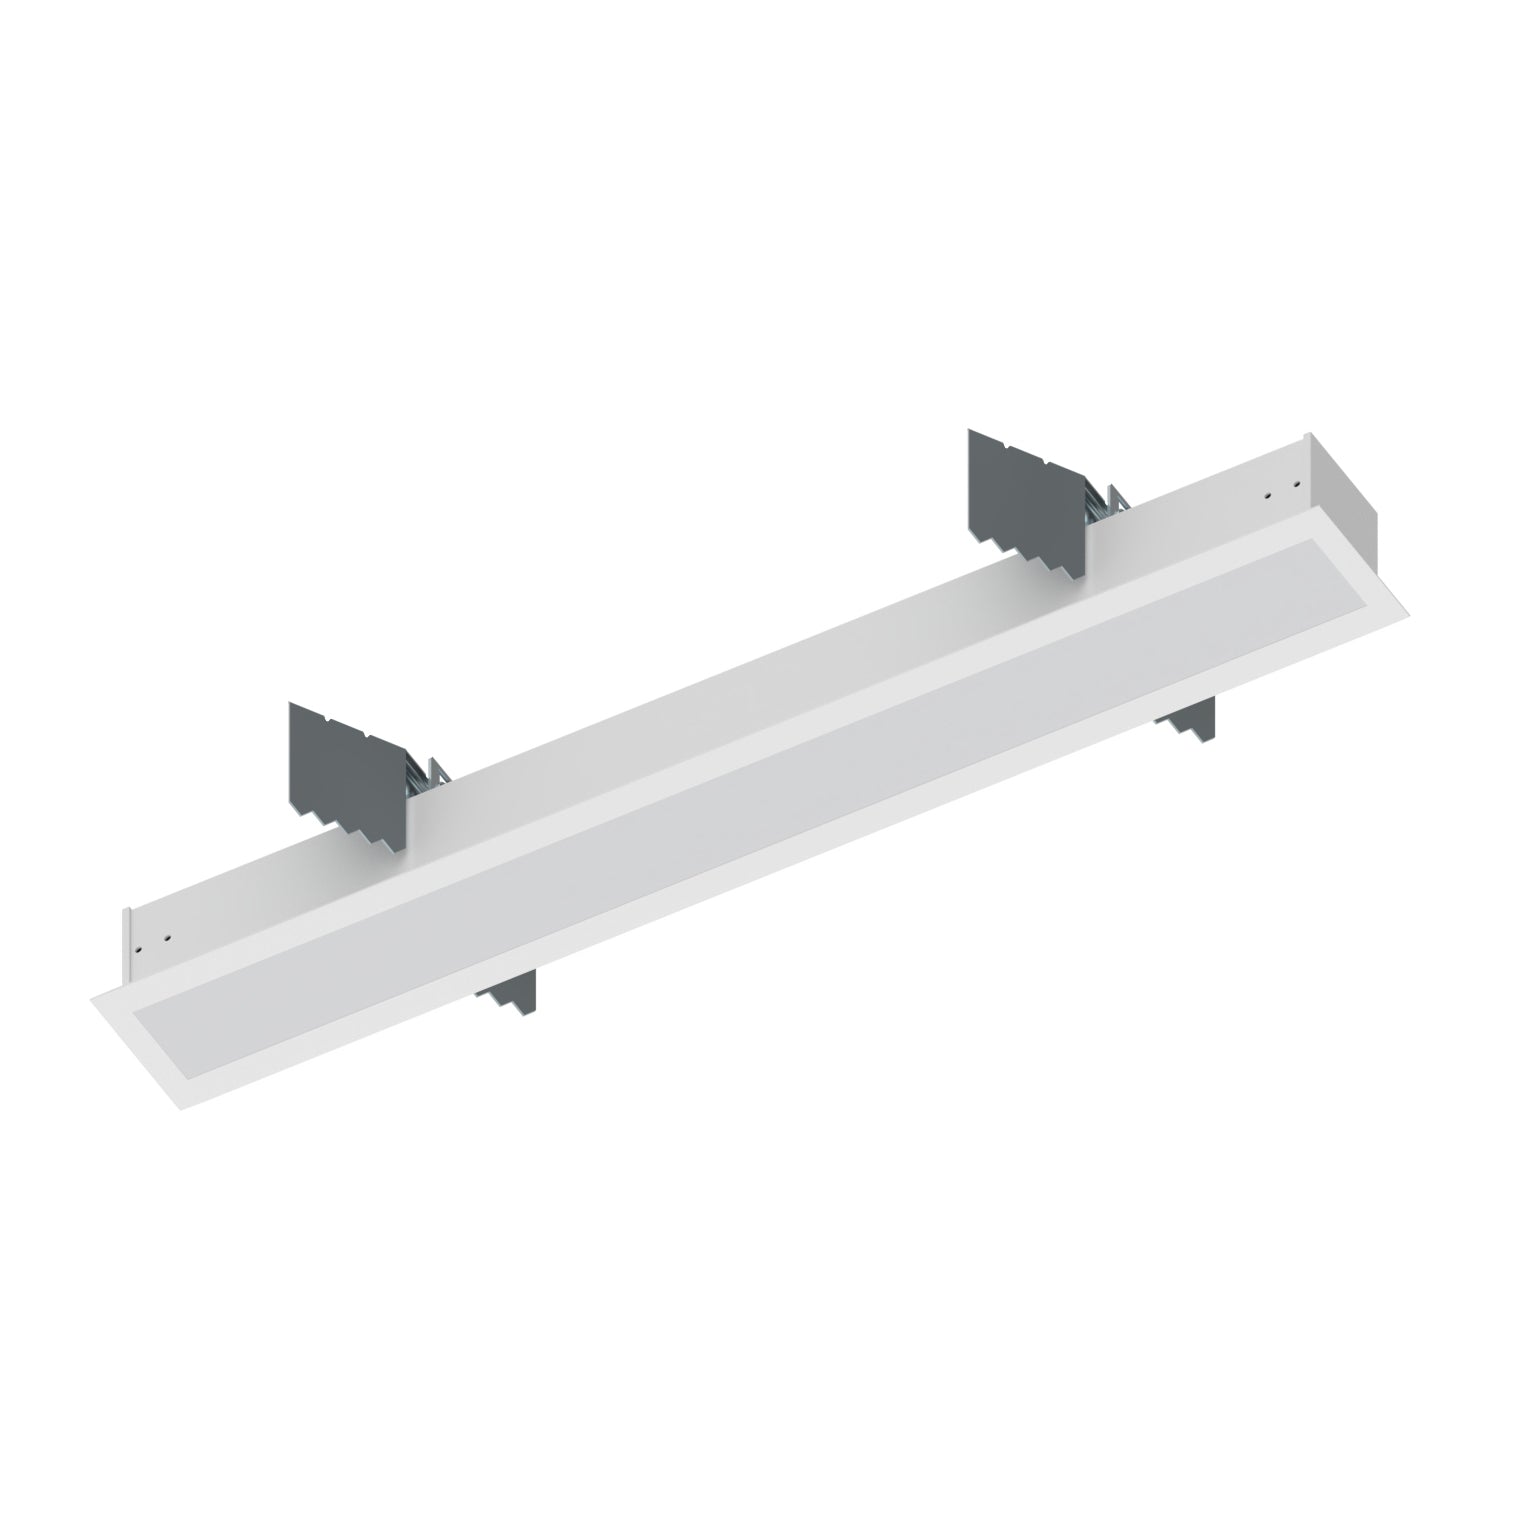 Nora Lighting NRLIN-21035W - Linear - 2' L-Line LED Recessed Linear, 2100lm / 3500K, White Finish